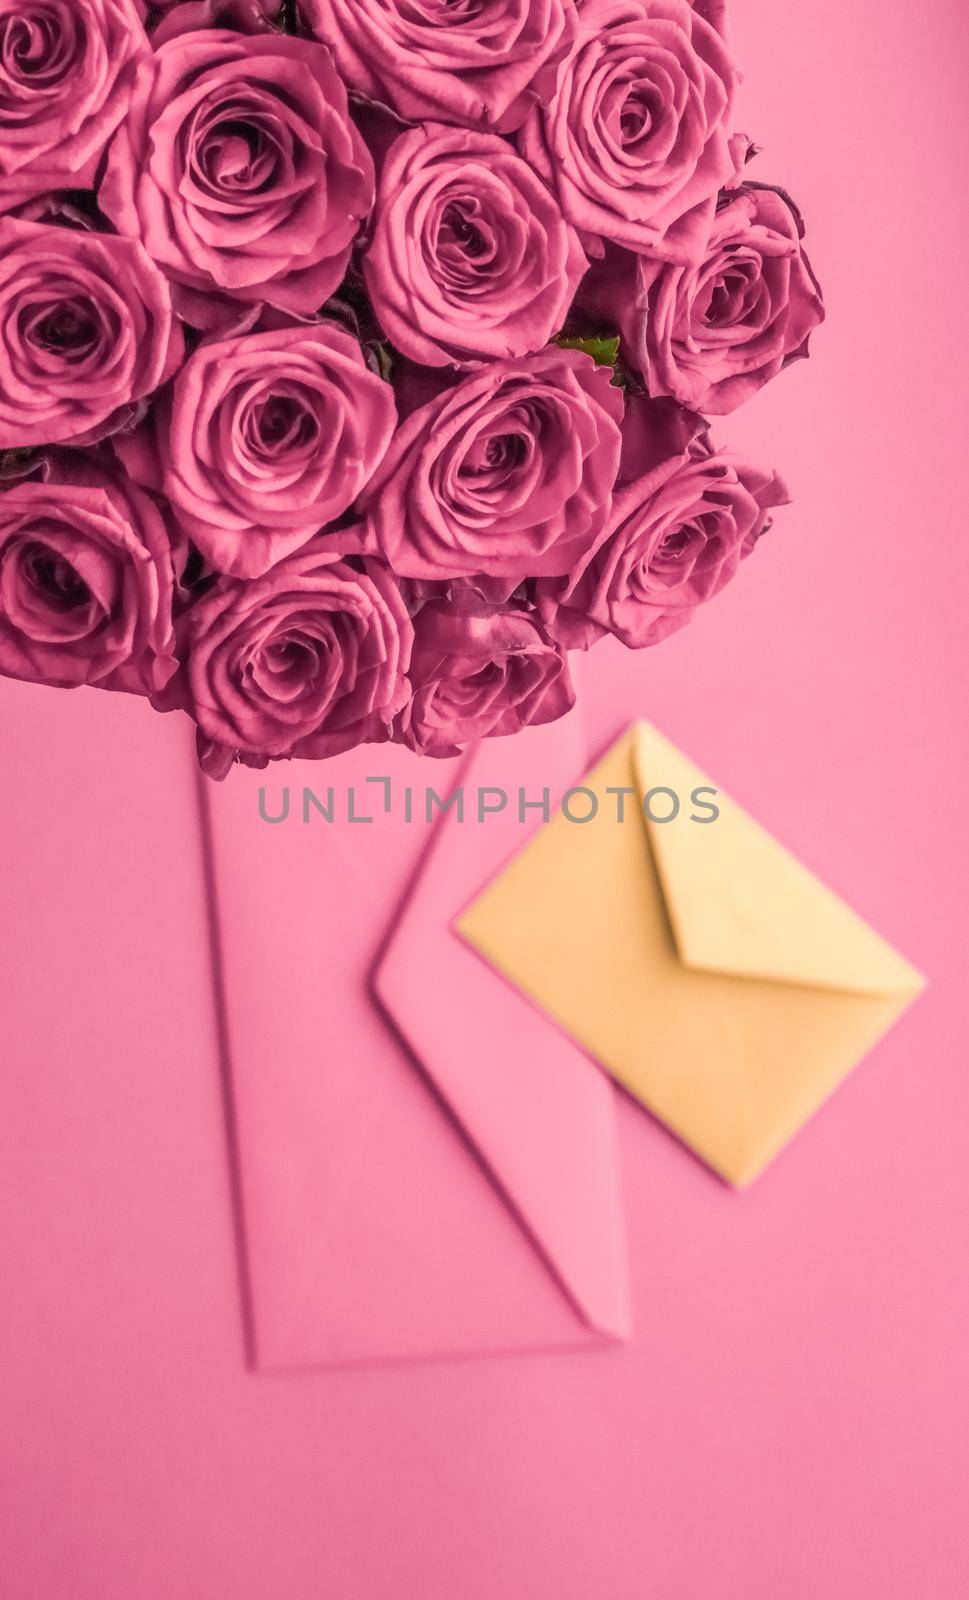 Holiday love letter and flowers delivery, luxury bouquet of roses and card on blush pink background for romantic holiday design by Anneleven